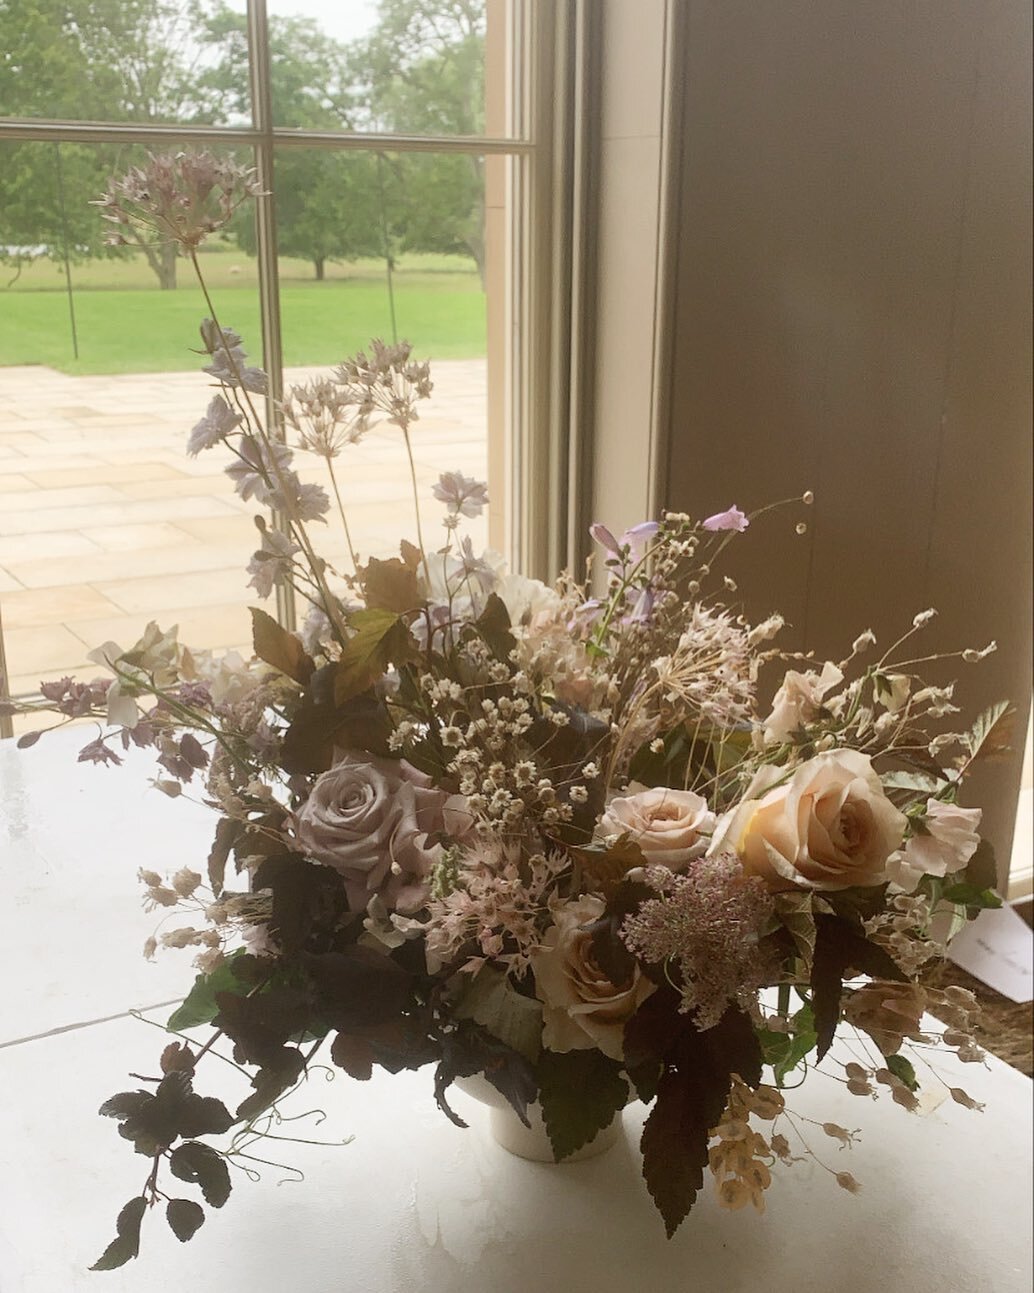 Home from a dream weekend working at my dream venue @wildernessreserve, on a dream brief designed by @mirabellaweddings for dream bride @harrisonolivia_. Huge thanks to my (dream) team for their hard work and to Rachel's team for making the whole exp